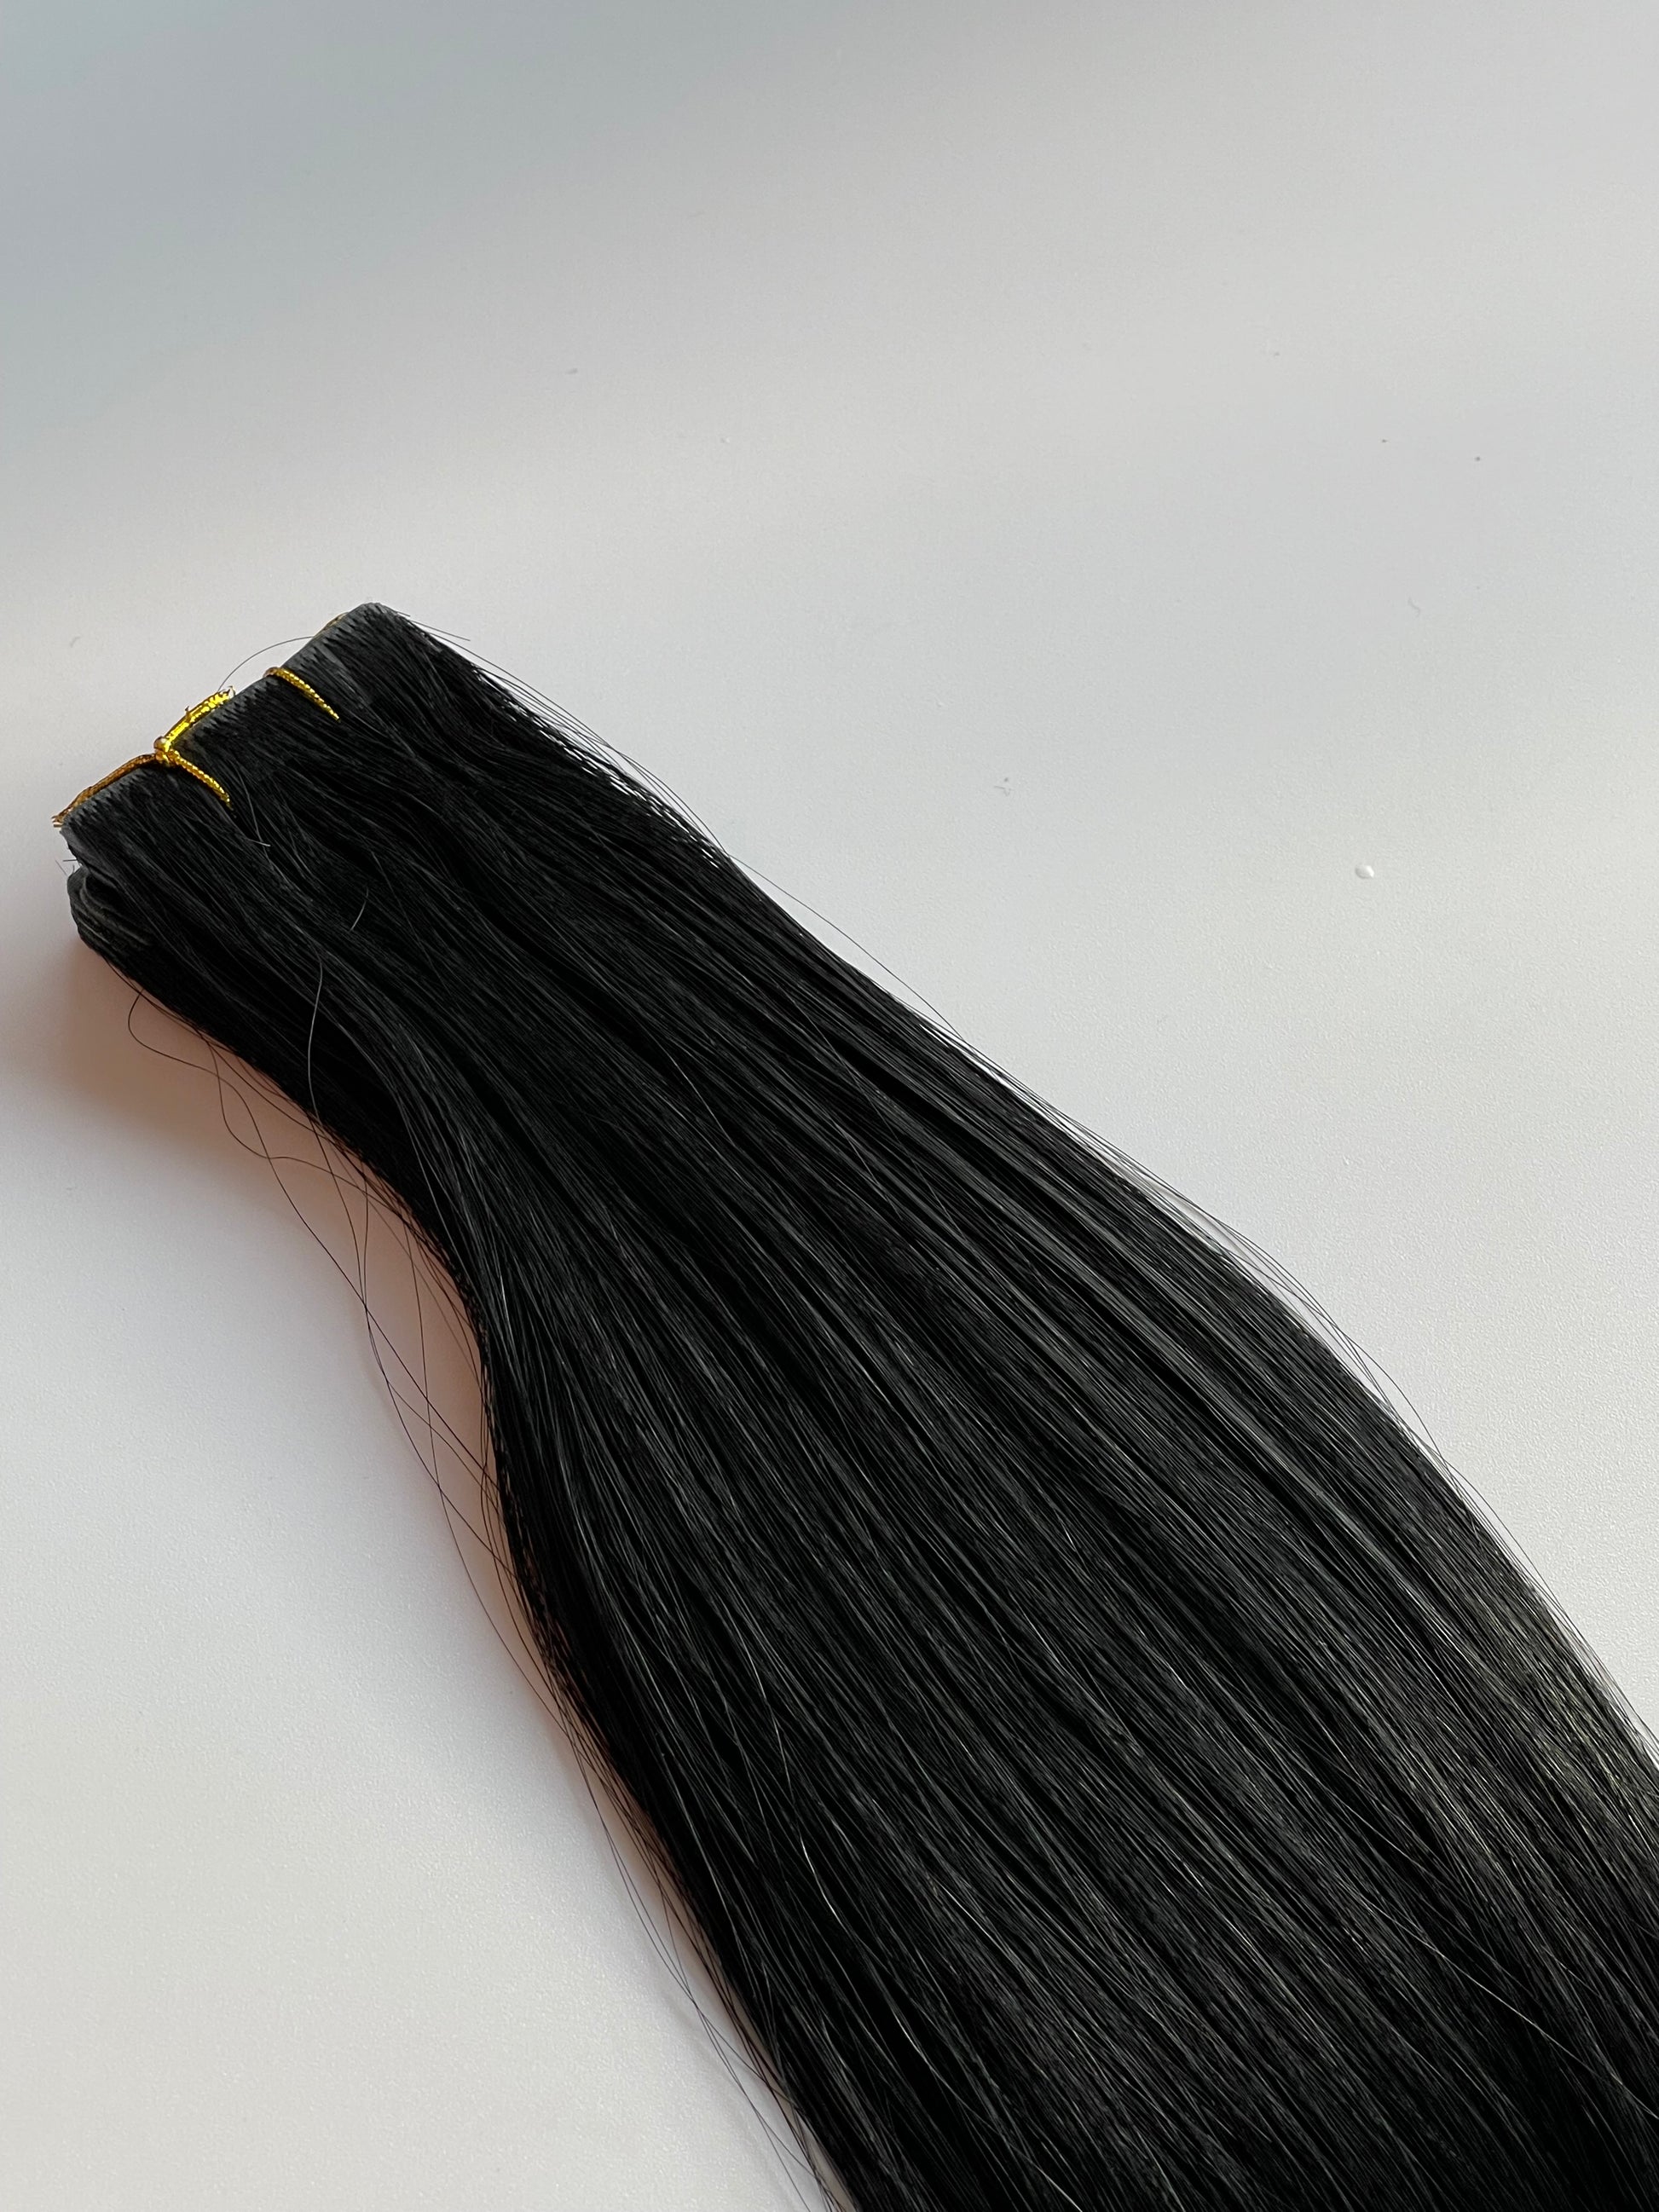 Remi cachet, beauty works, raven, ebony, natural black, tape hair extensions, injection tapes, RUMOUR hair extensions, hair extensions dubai, hair salon dubai, hair stickers, hair extensions Saudi, additional lengths 